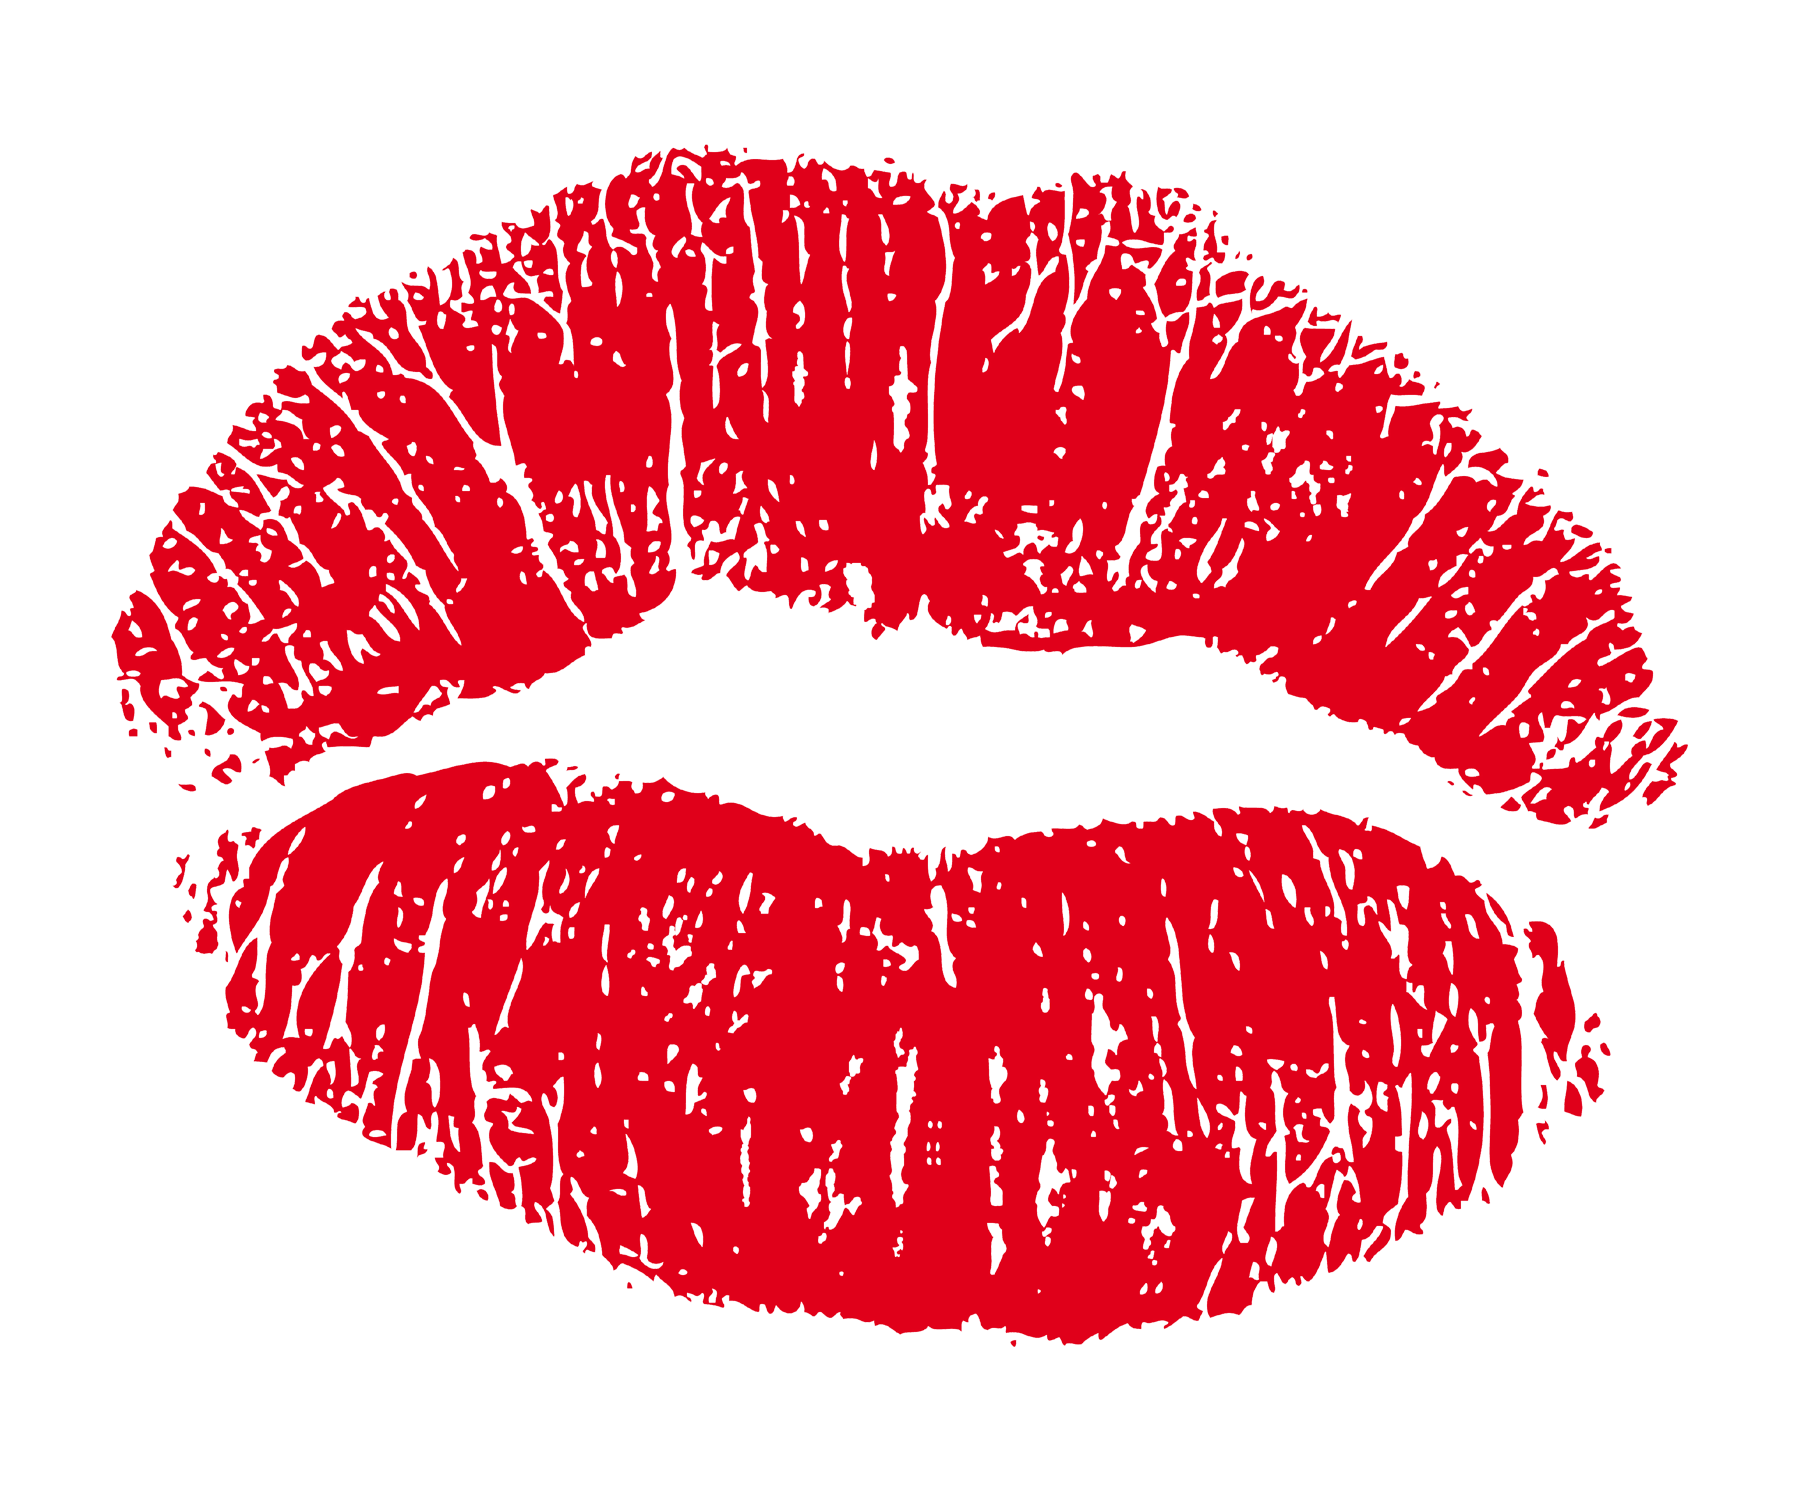 Lips PNG image free download, kiss PNG.